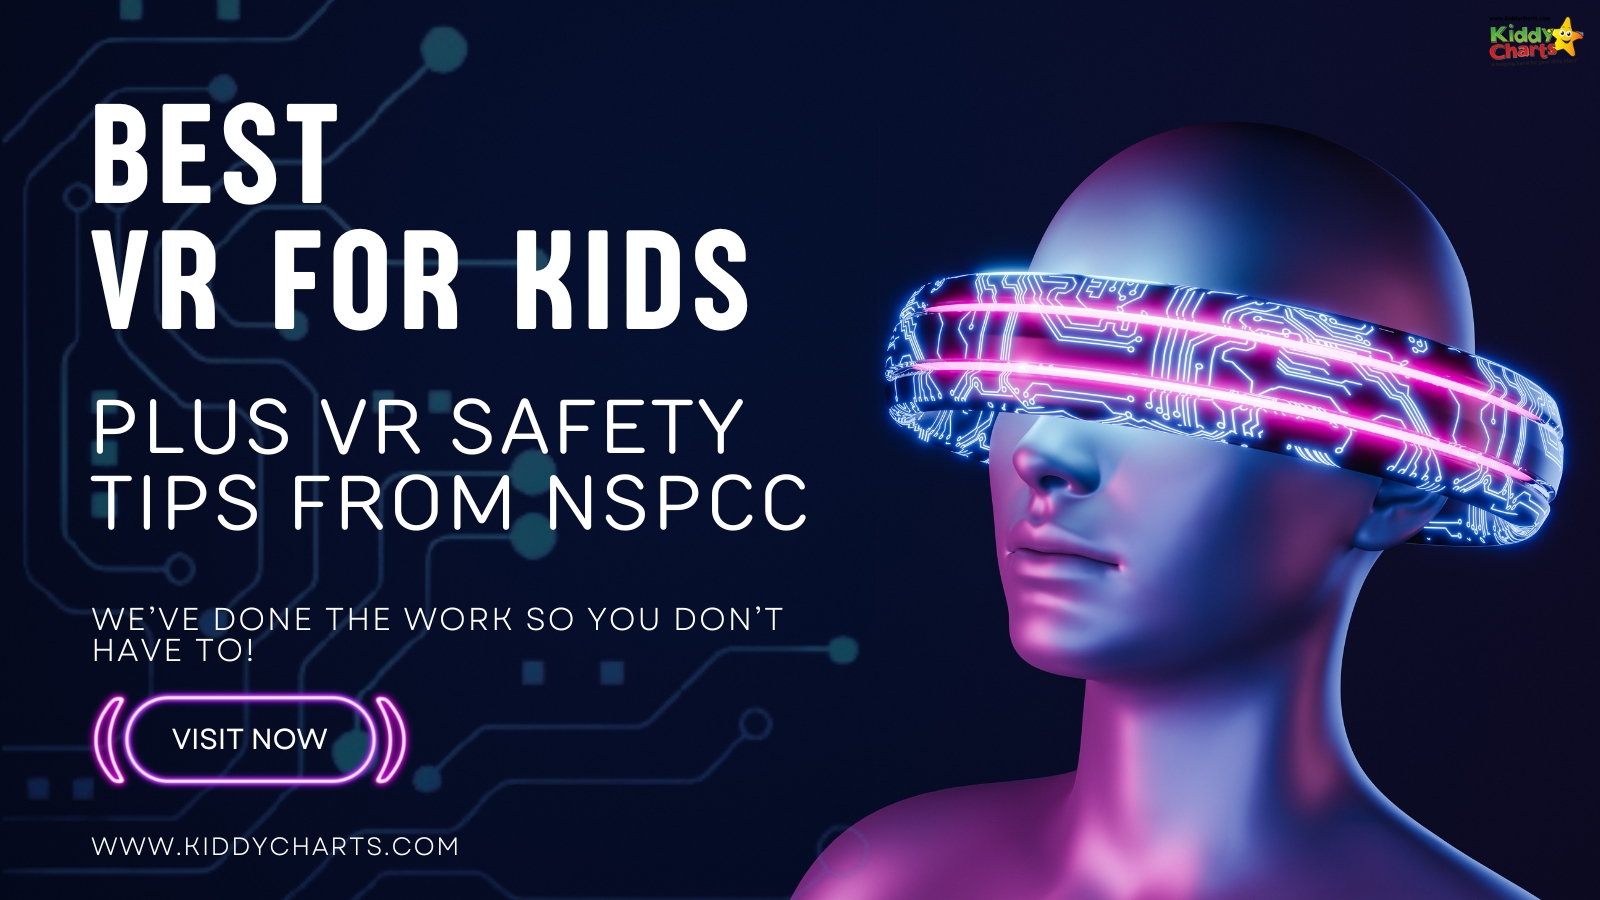 5 tips for keeping VR for kids safe from the NSPCC: Includes best VR for kids